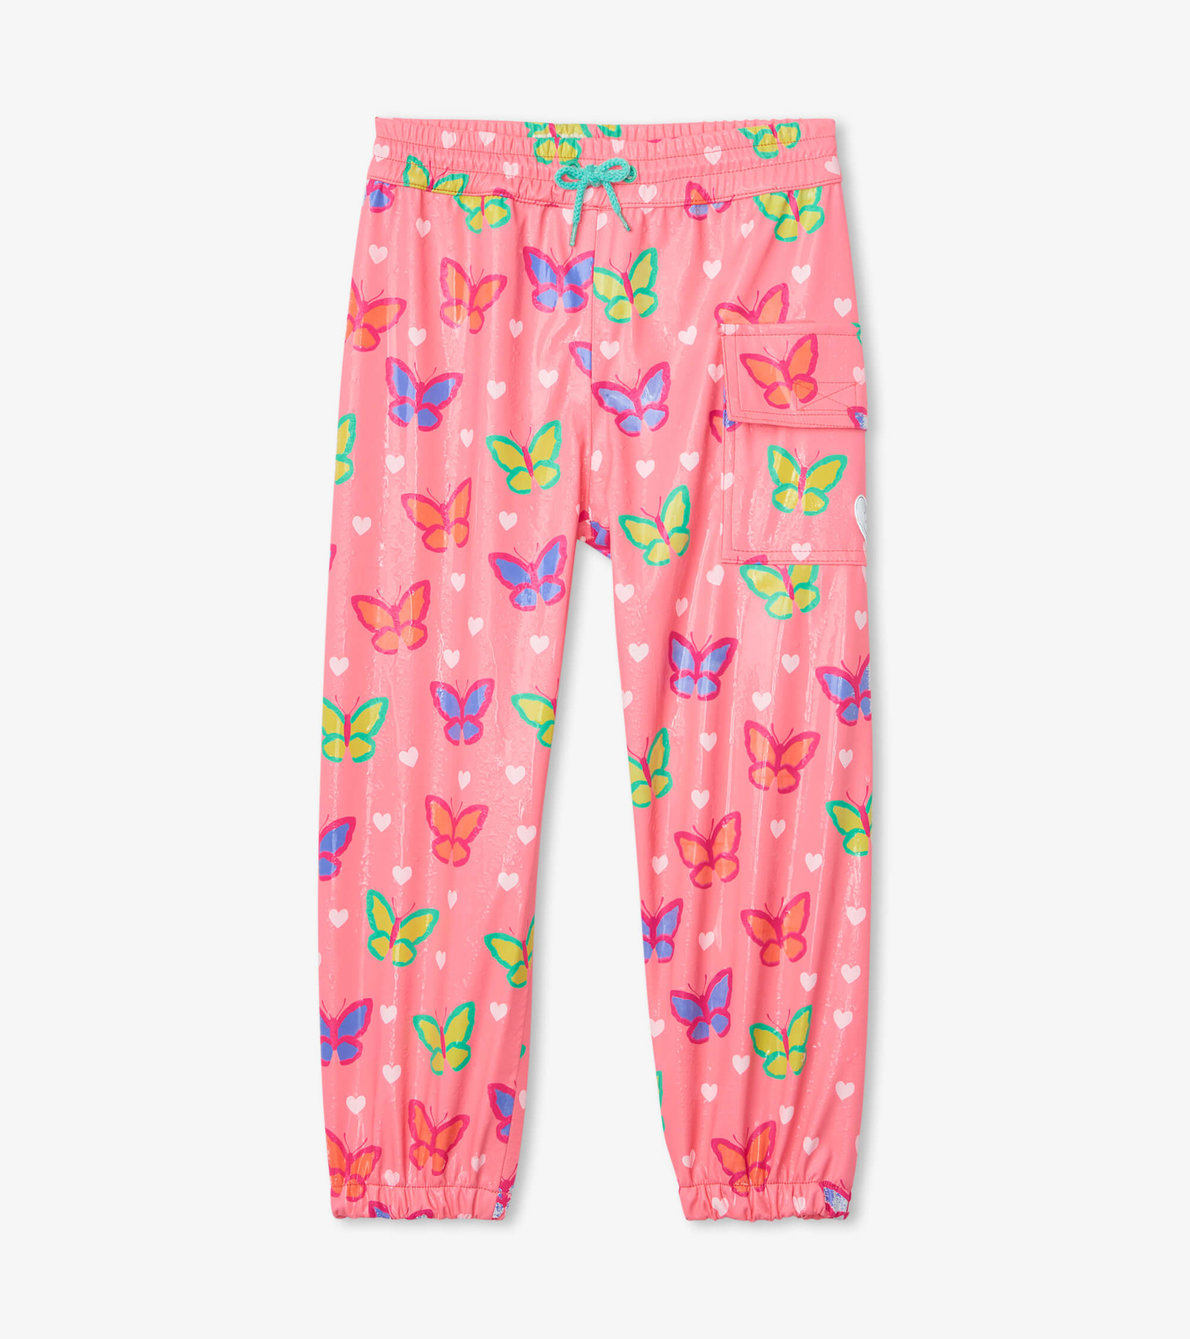 View larger image of Dainty Butterflies Colour Changing Kids Rain Pants